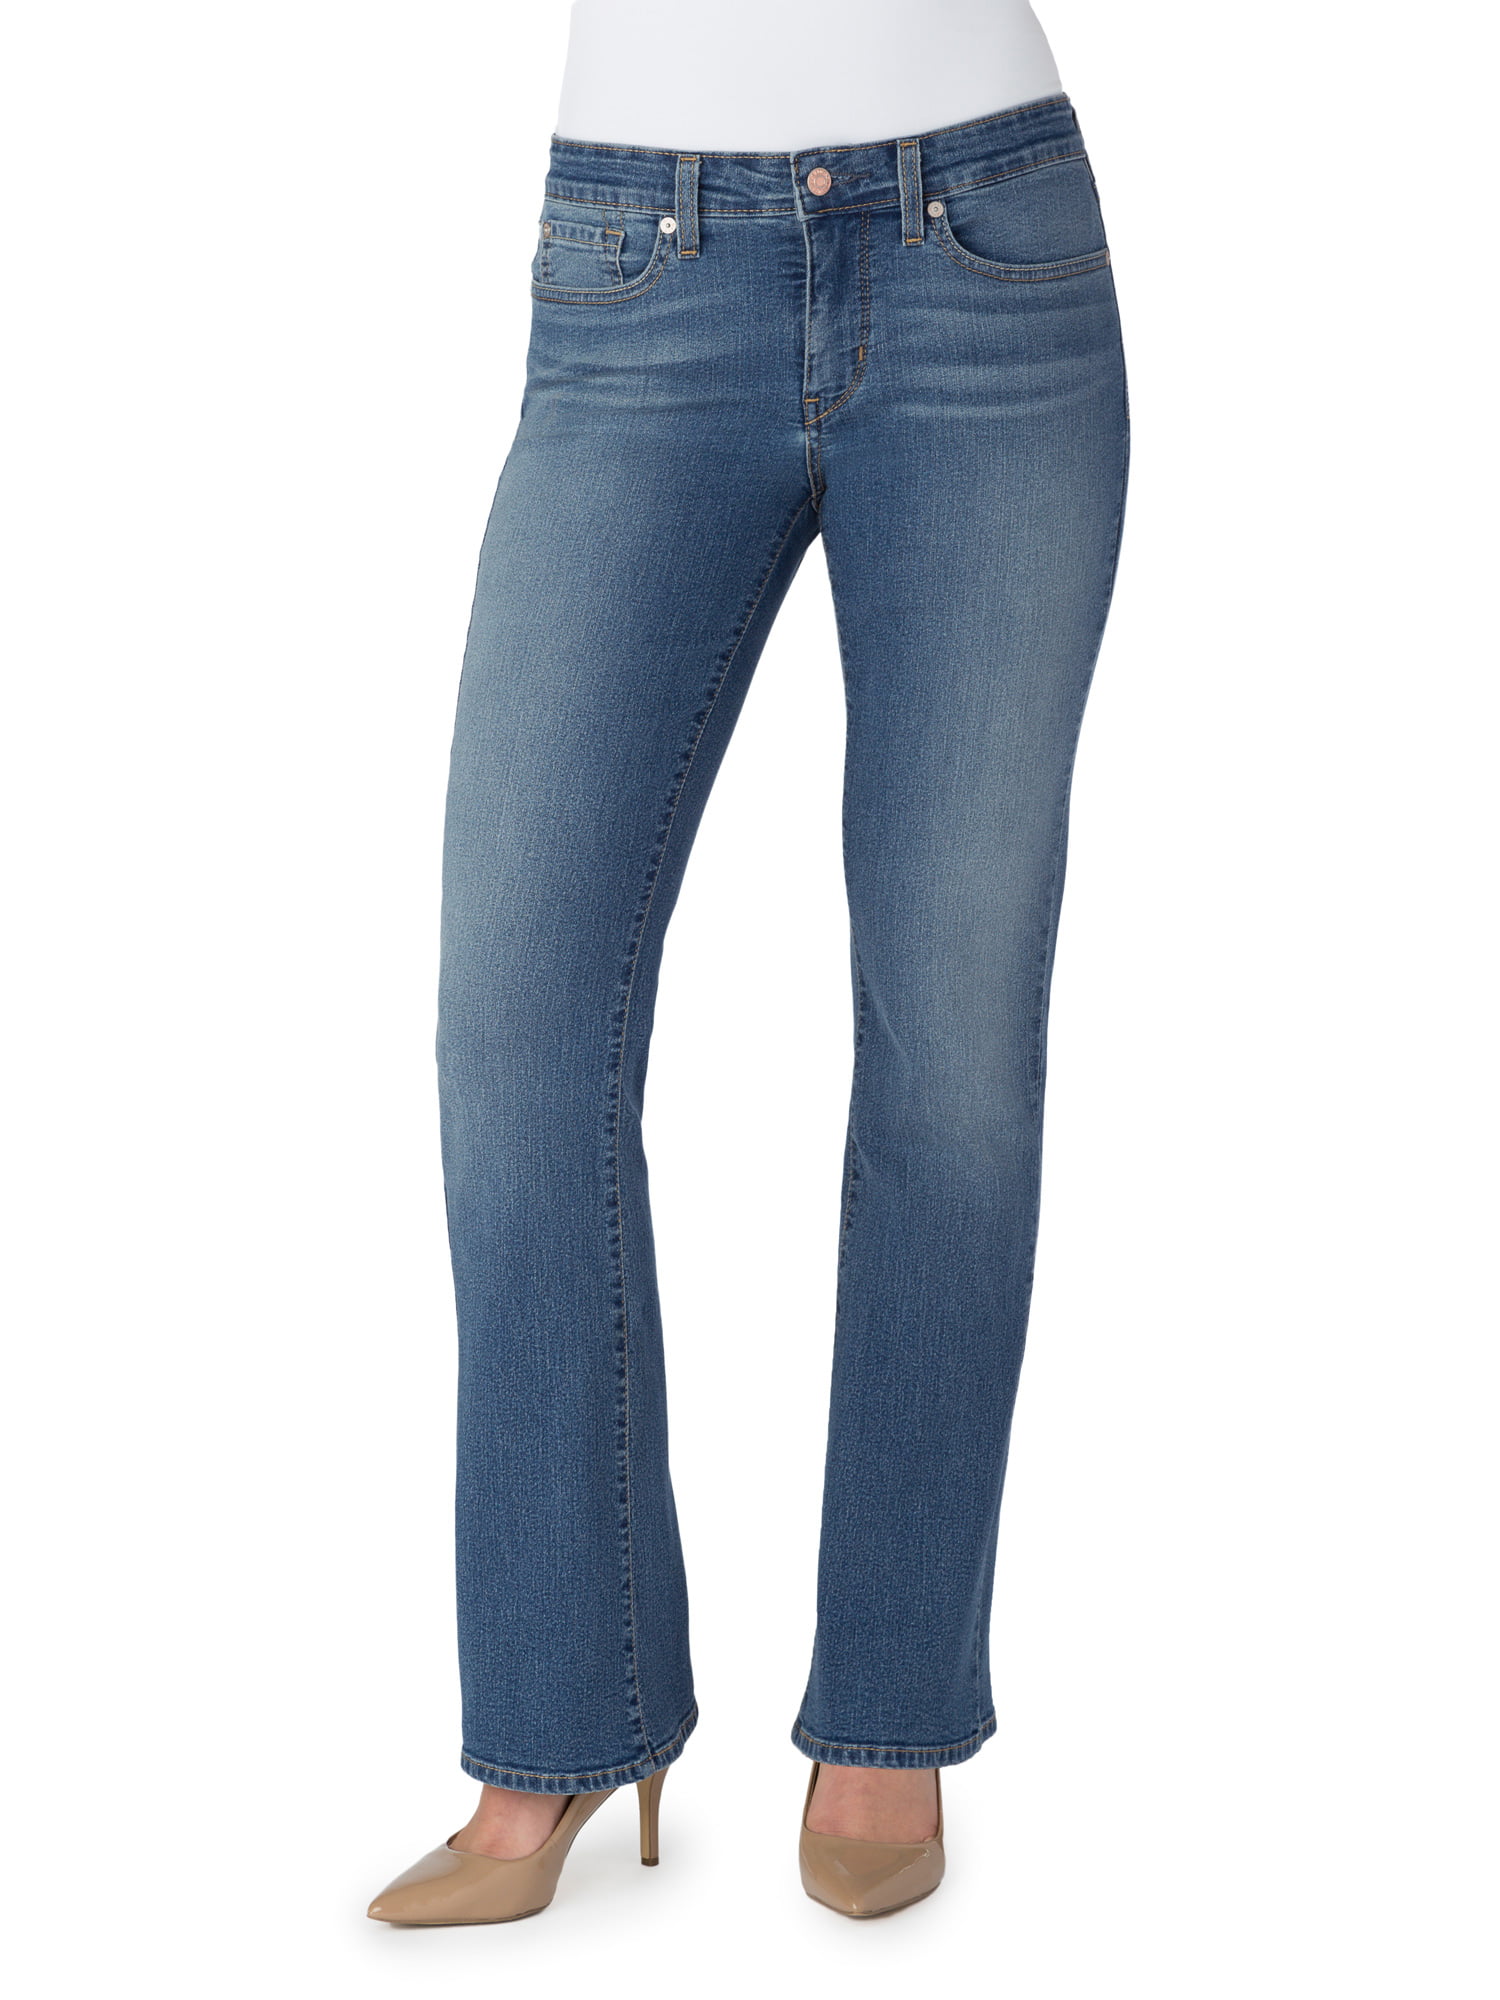 Buy > shaping bootcut jeans > in stock